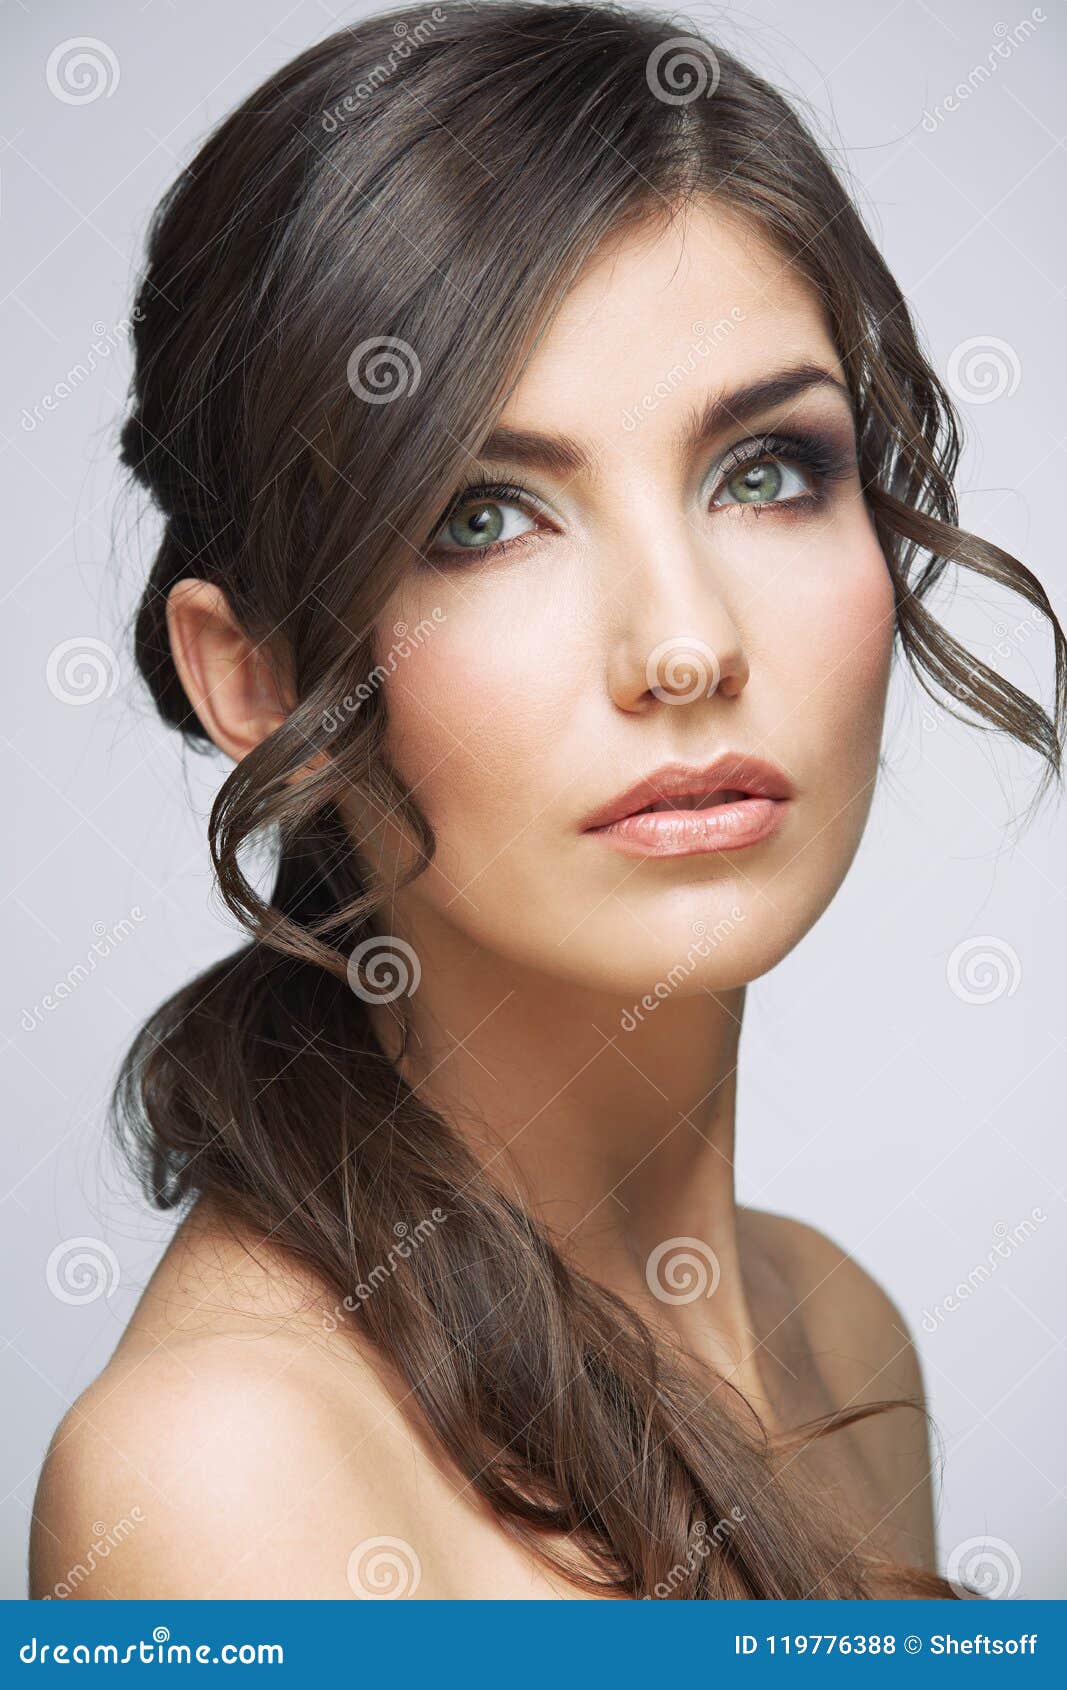 Beauty Portrait Woman with Long Hair. Stock Photo - Image of young ...